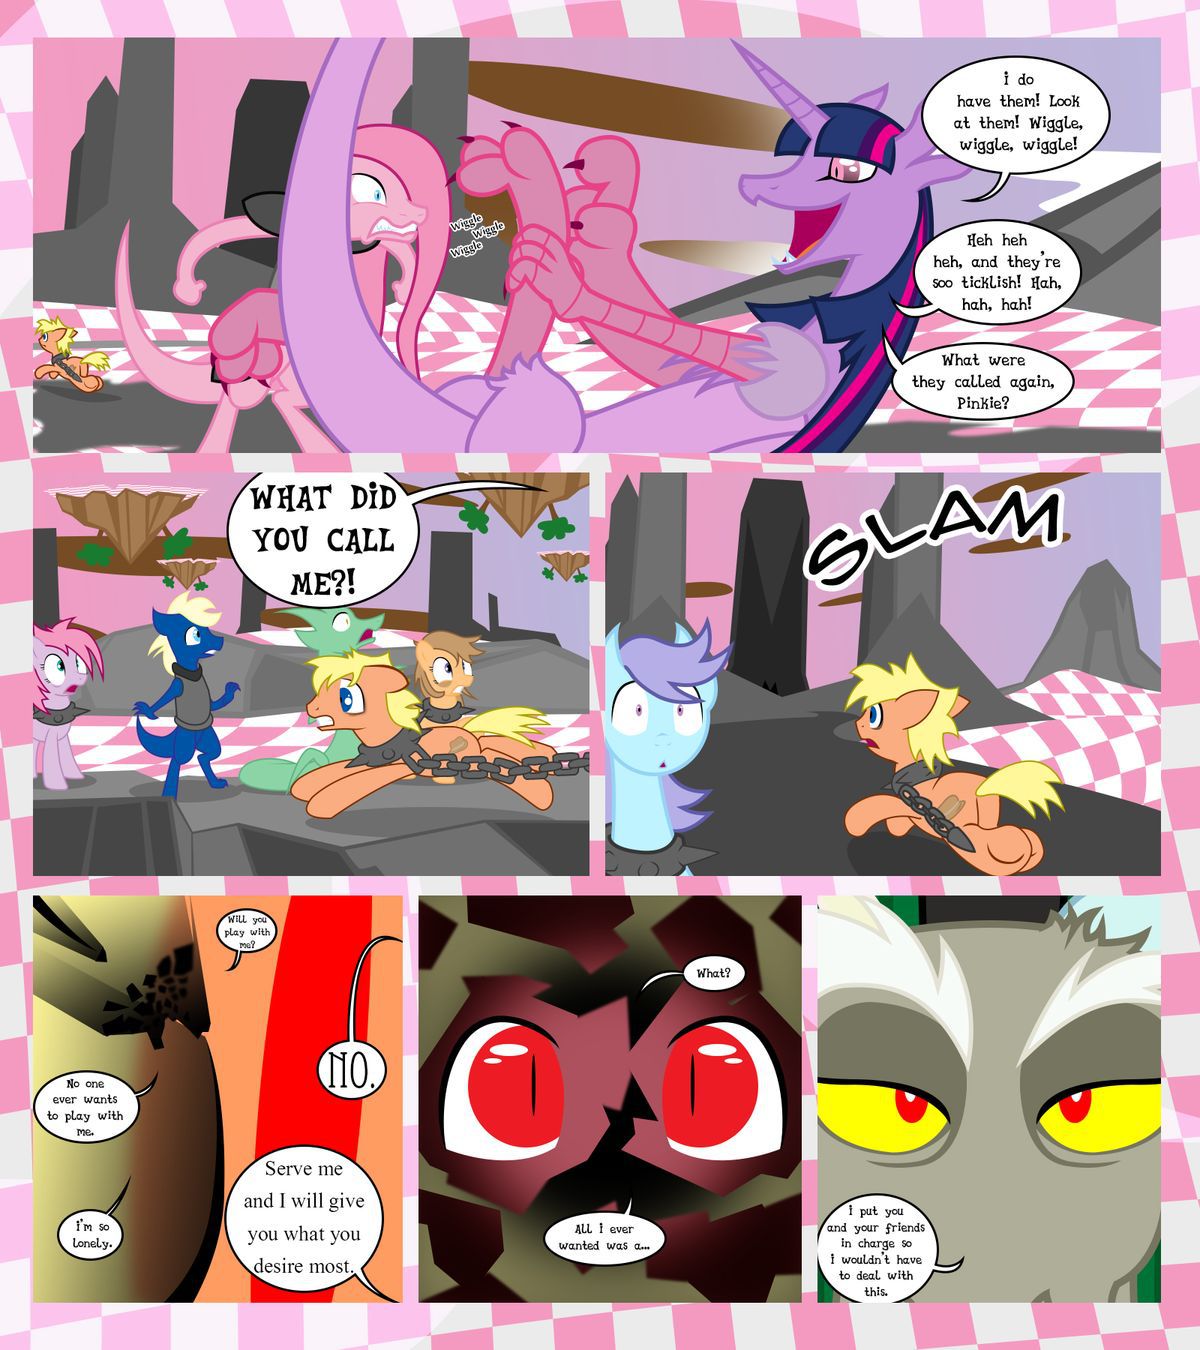 [GatesMcCloud] Cutie Mark Crusaders 10k: Chapter 3 - The Lost (My Little Pony: Friendship is Magic) [English] [Ongoing] 12